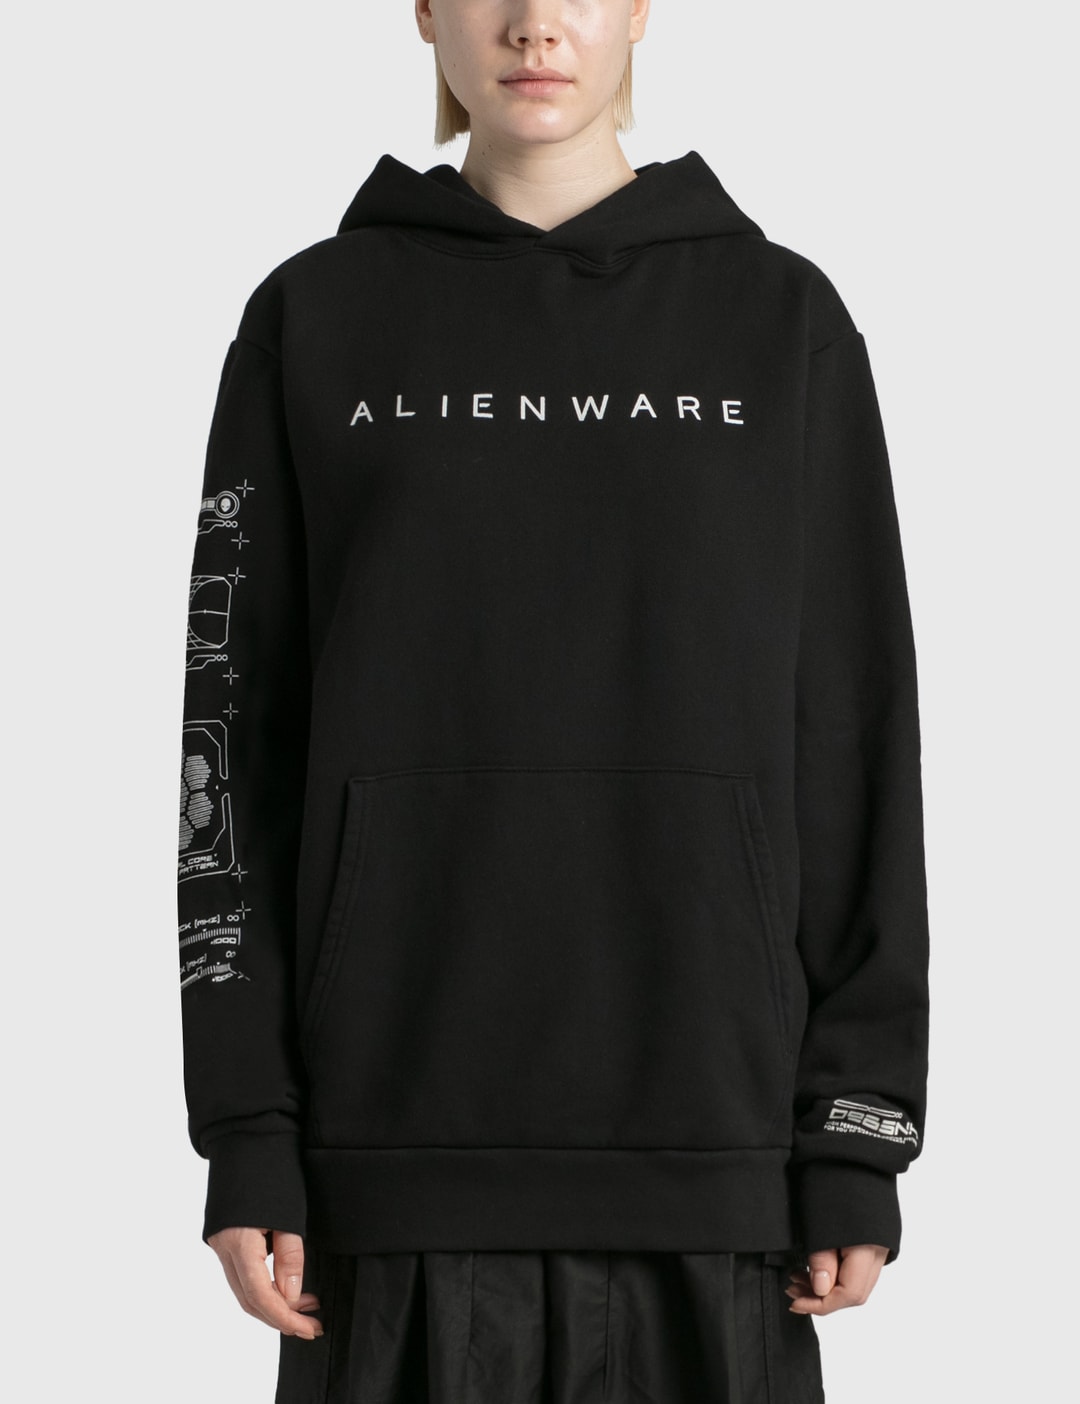 First Contact Hoodie Placeholder Image